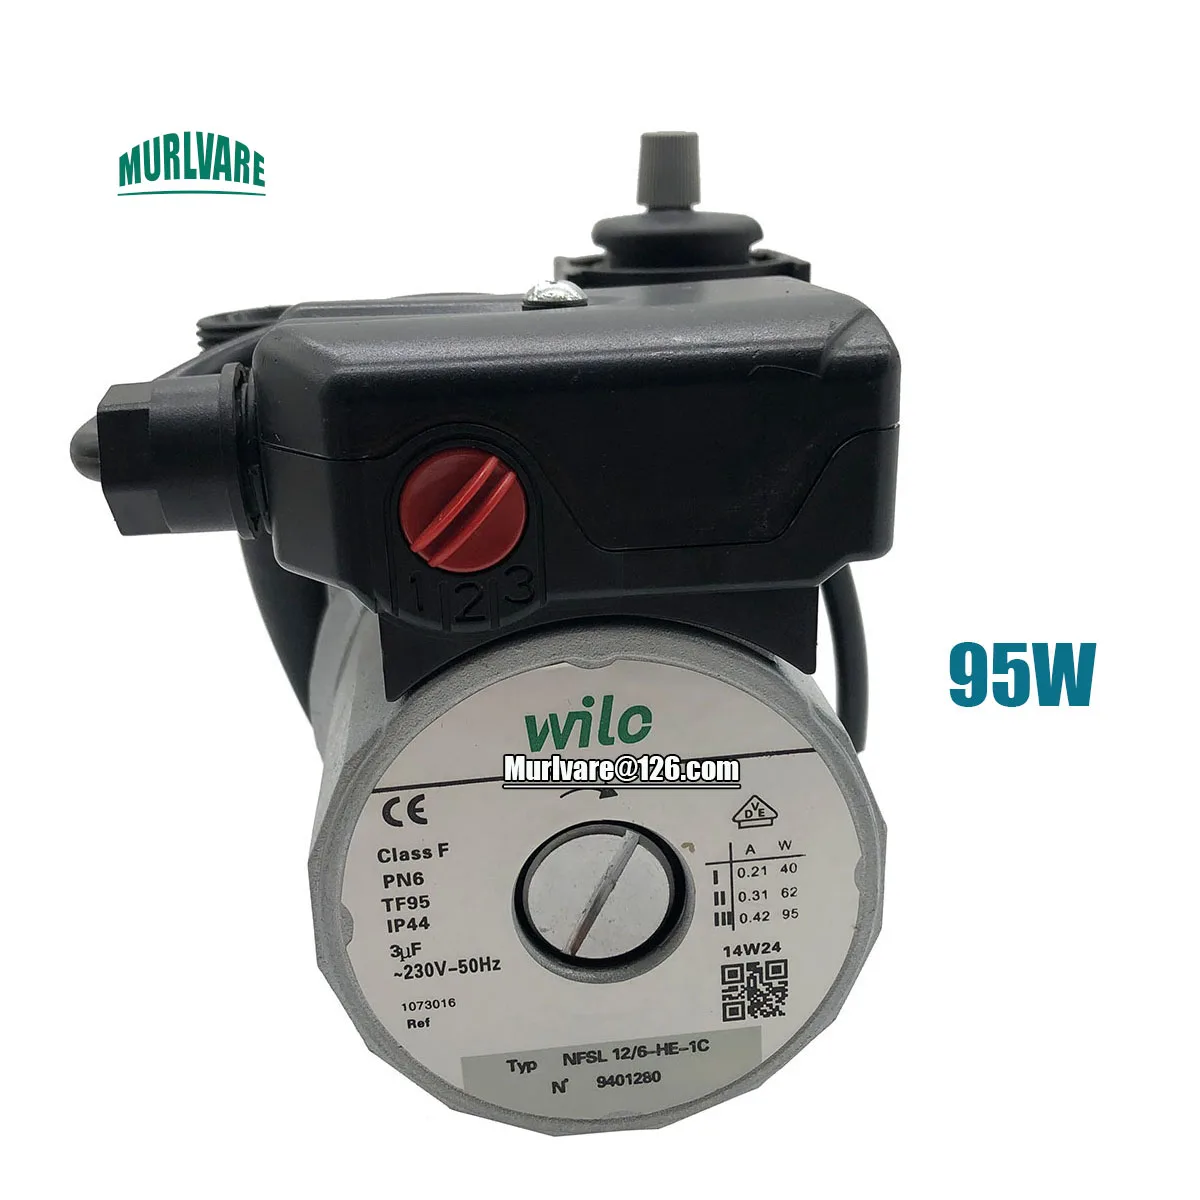 

Wholesale Wilo NFSL12/6-HE-1C 95W Water Circulation Pump Motor For Gas Heater Boiler Replacement